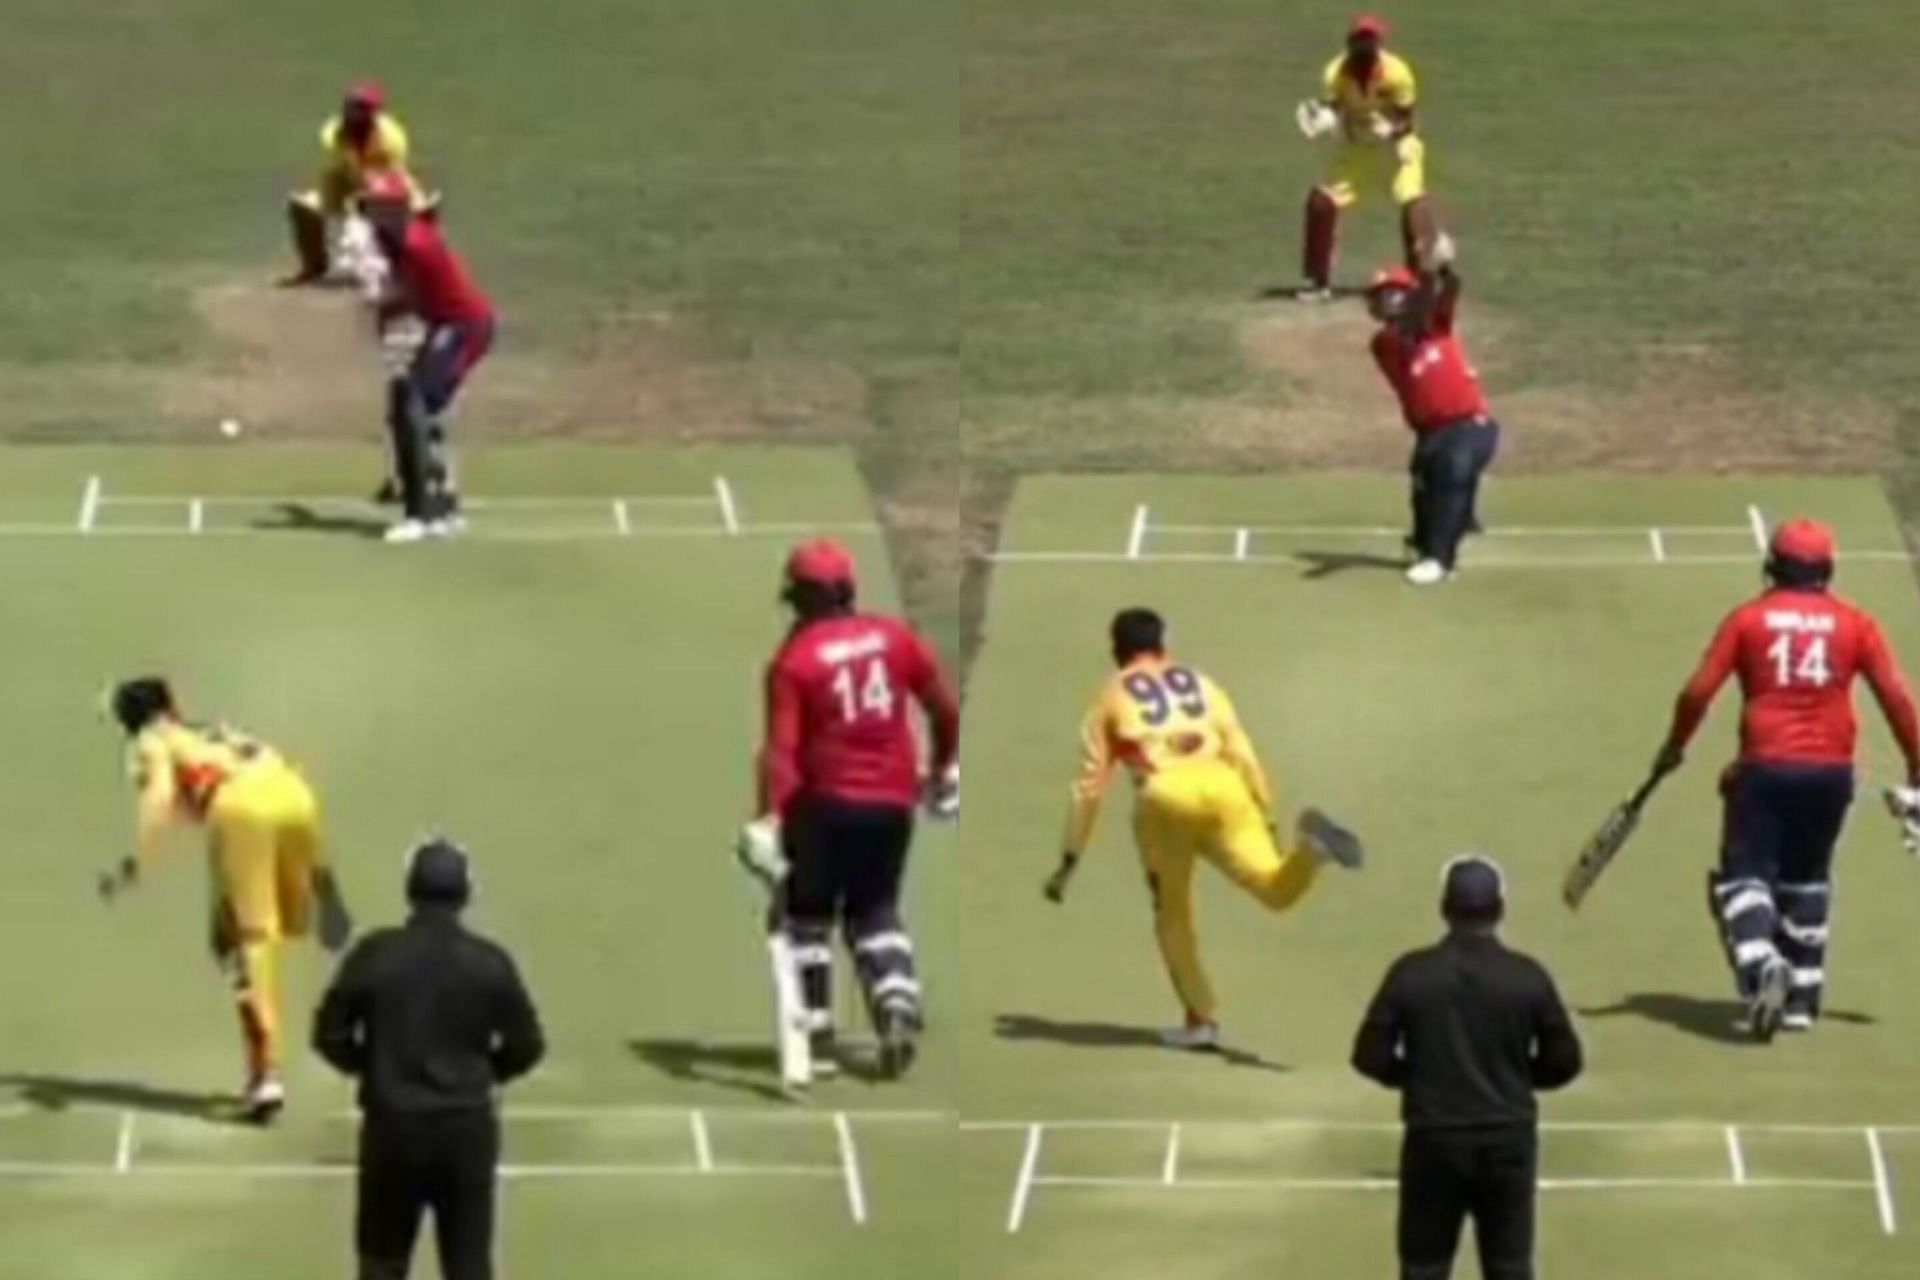 [Watch] Austria pulls off a miraculous chase by scoring 61 in the last two overs against Romania